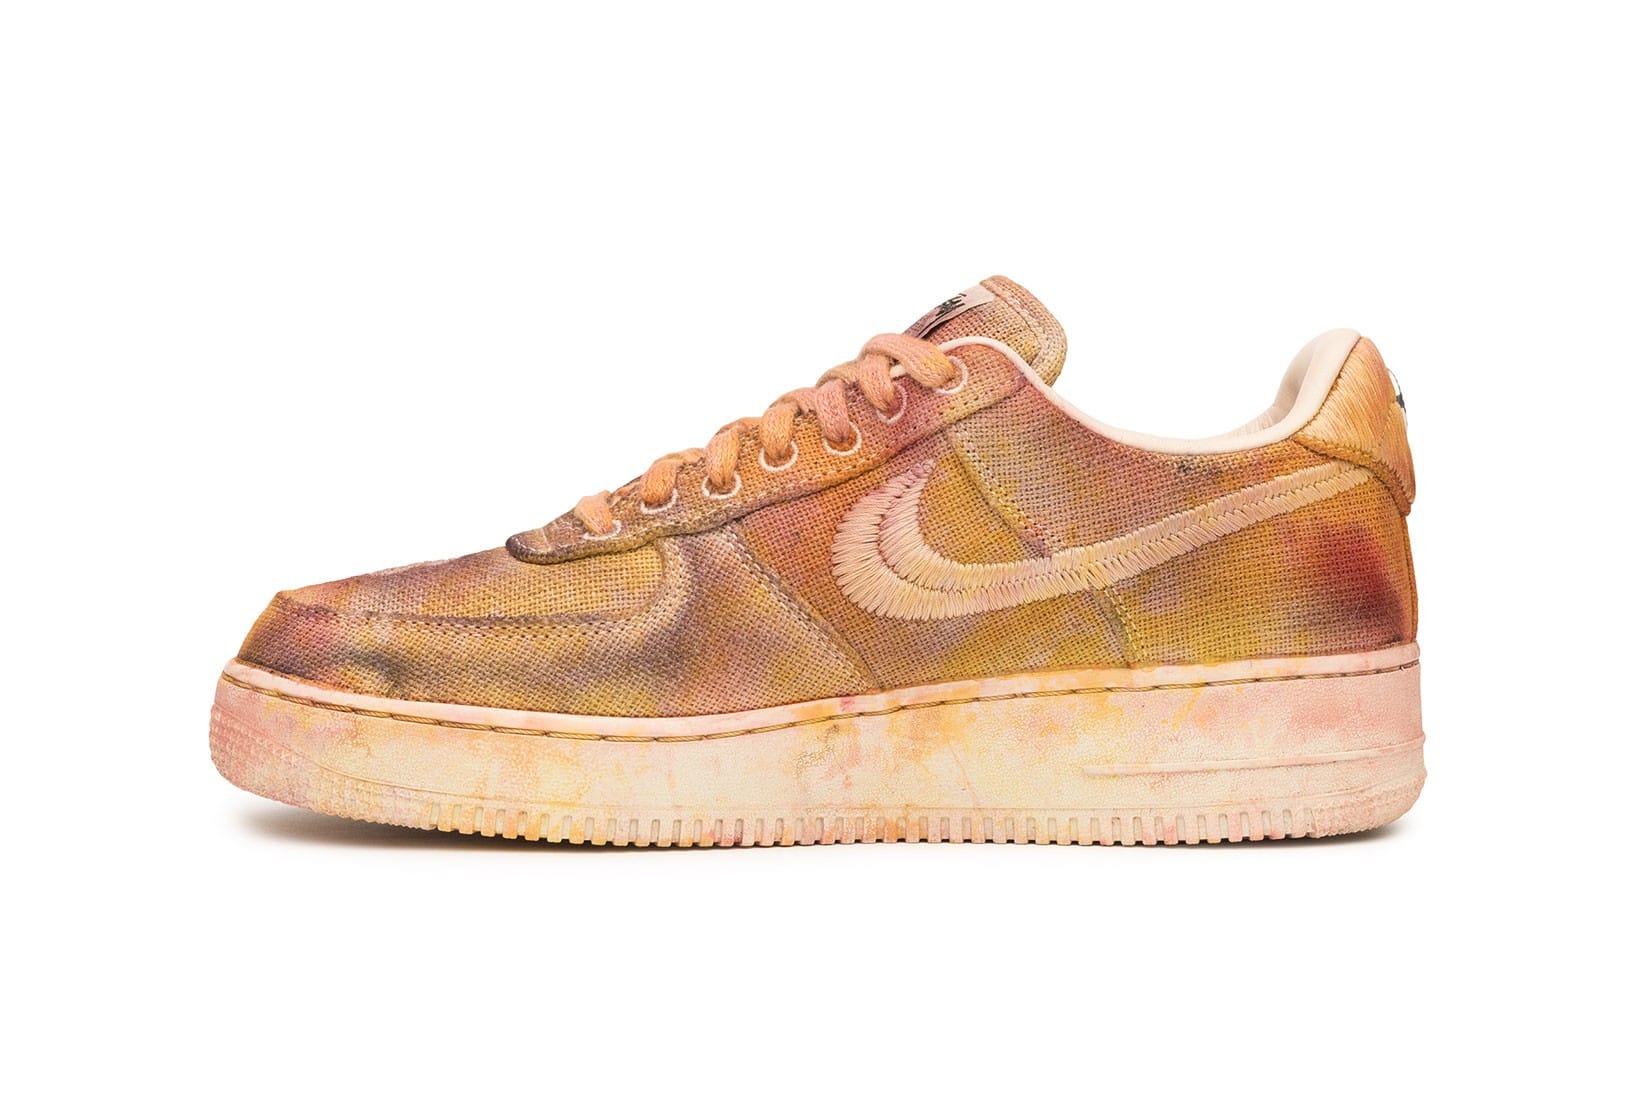 Stussy x Nike Hand-Dyed Air Force 1 